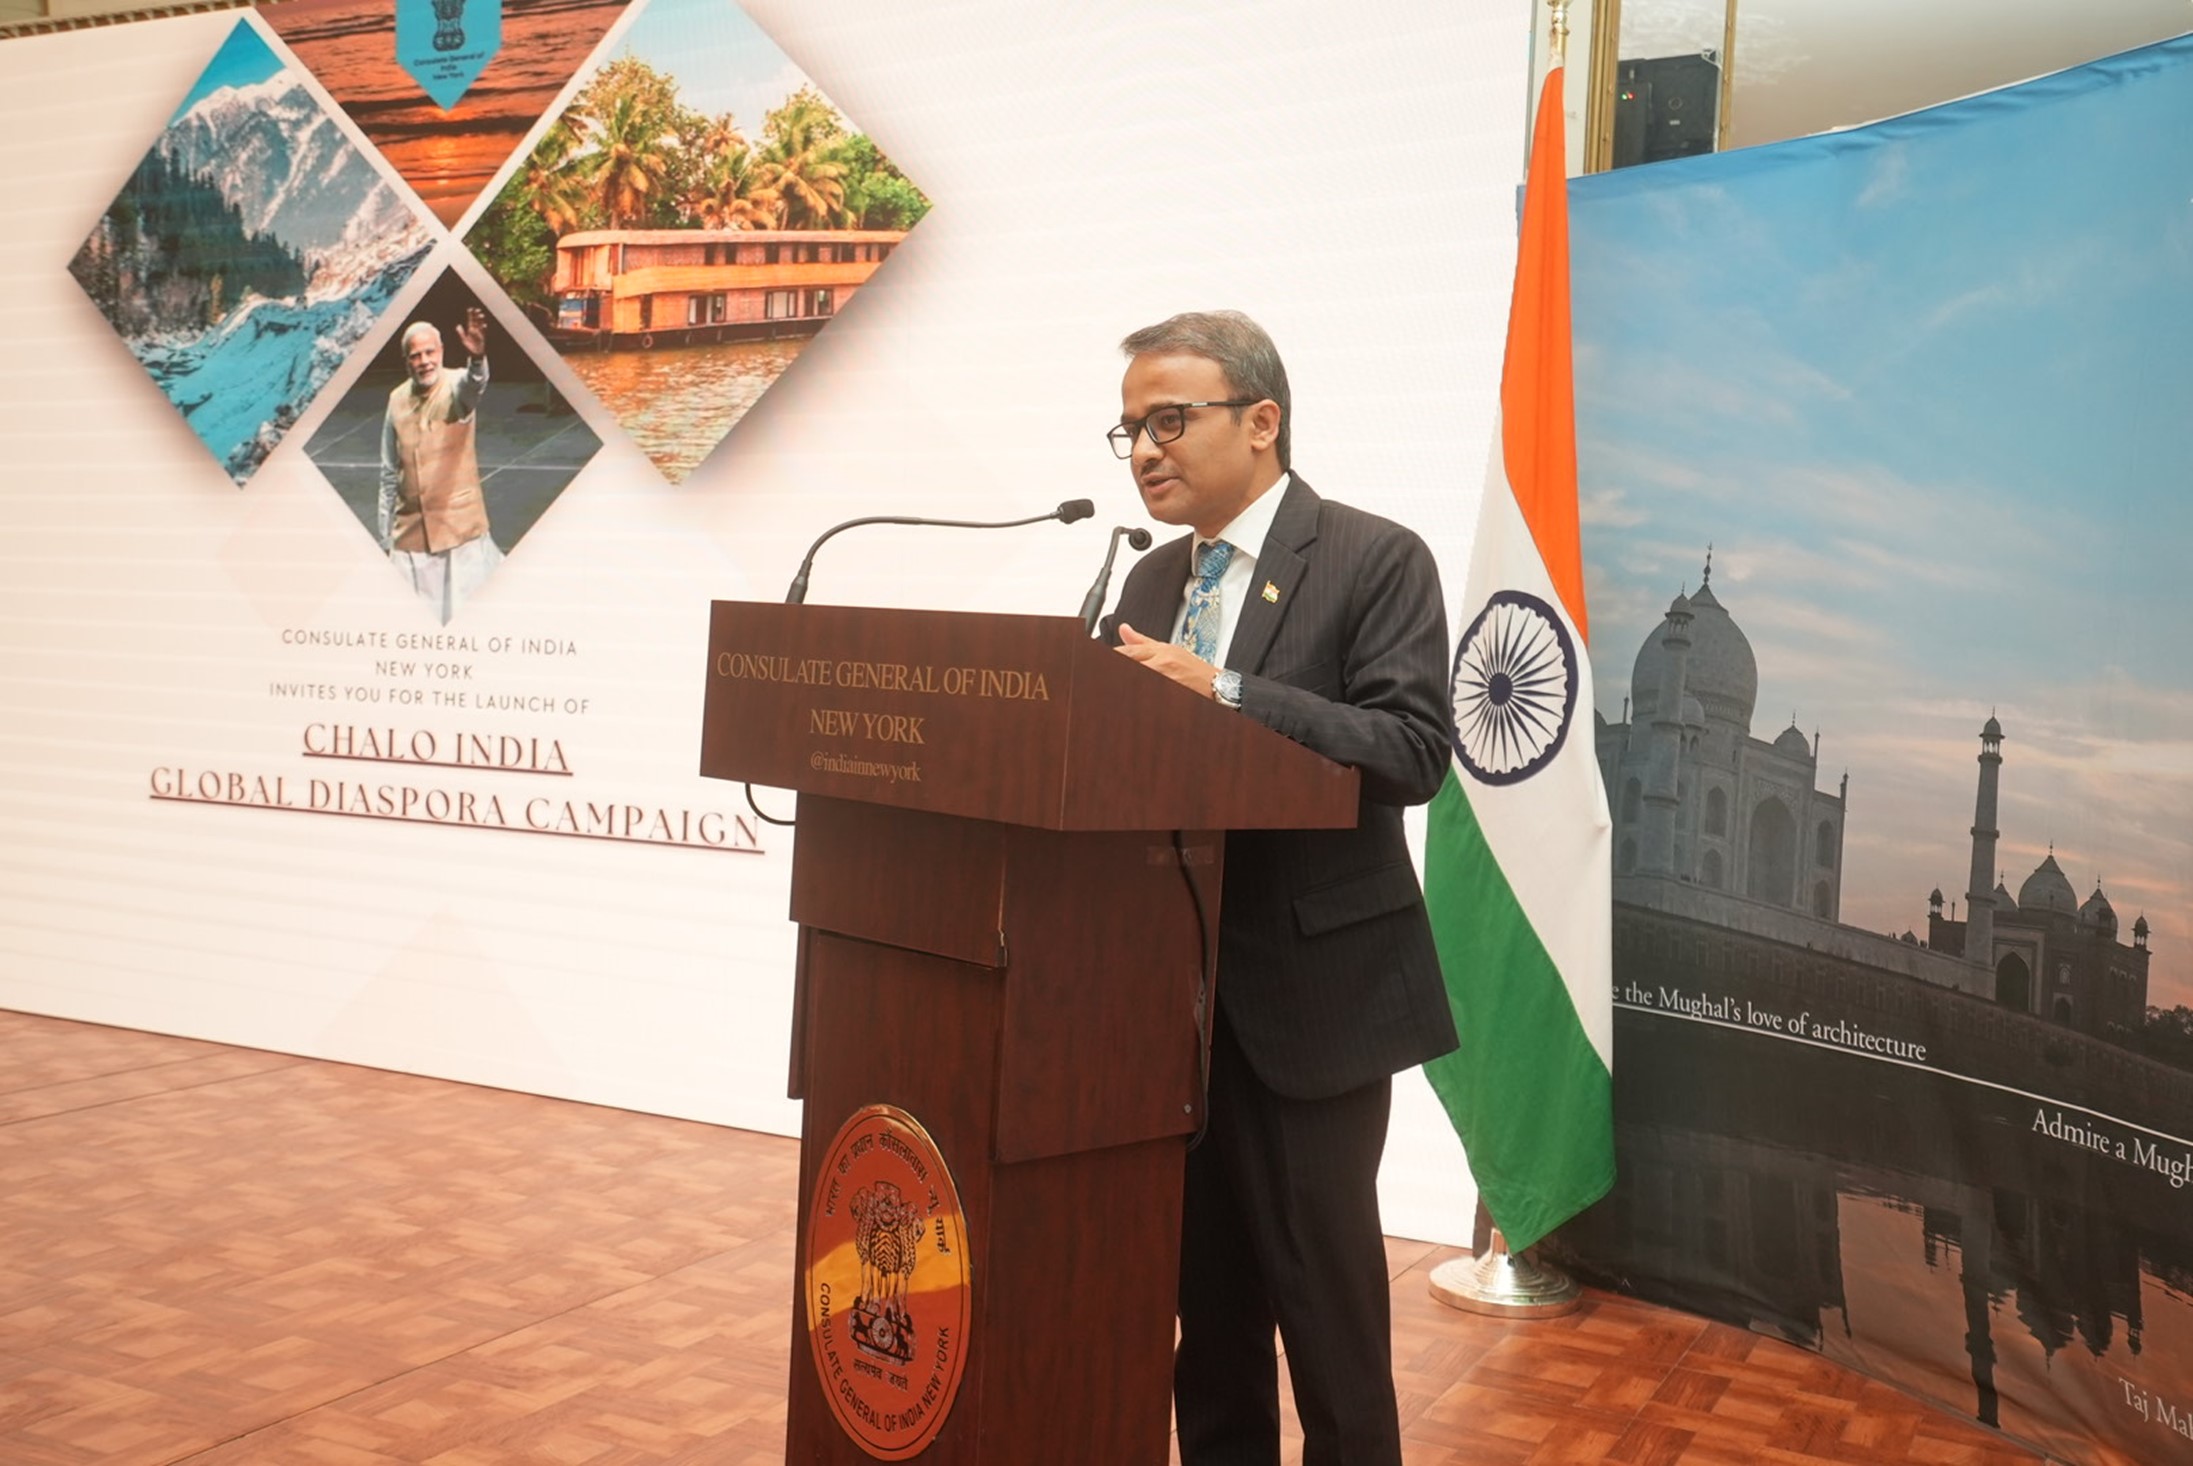 Consulate General of India launches ‘Chalo India – Global Diaspora Campaign’ in New York